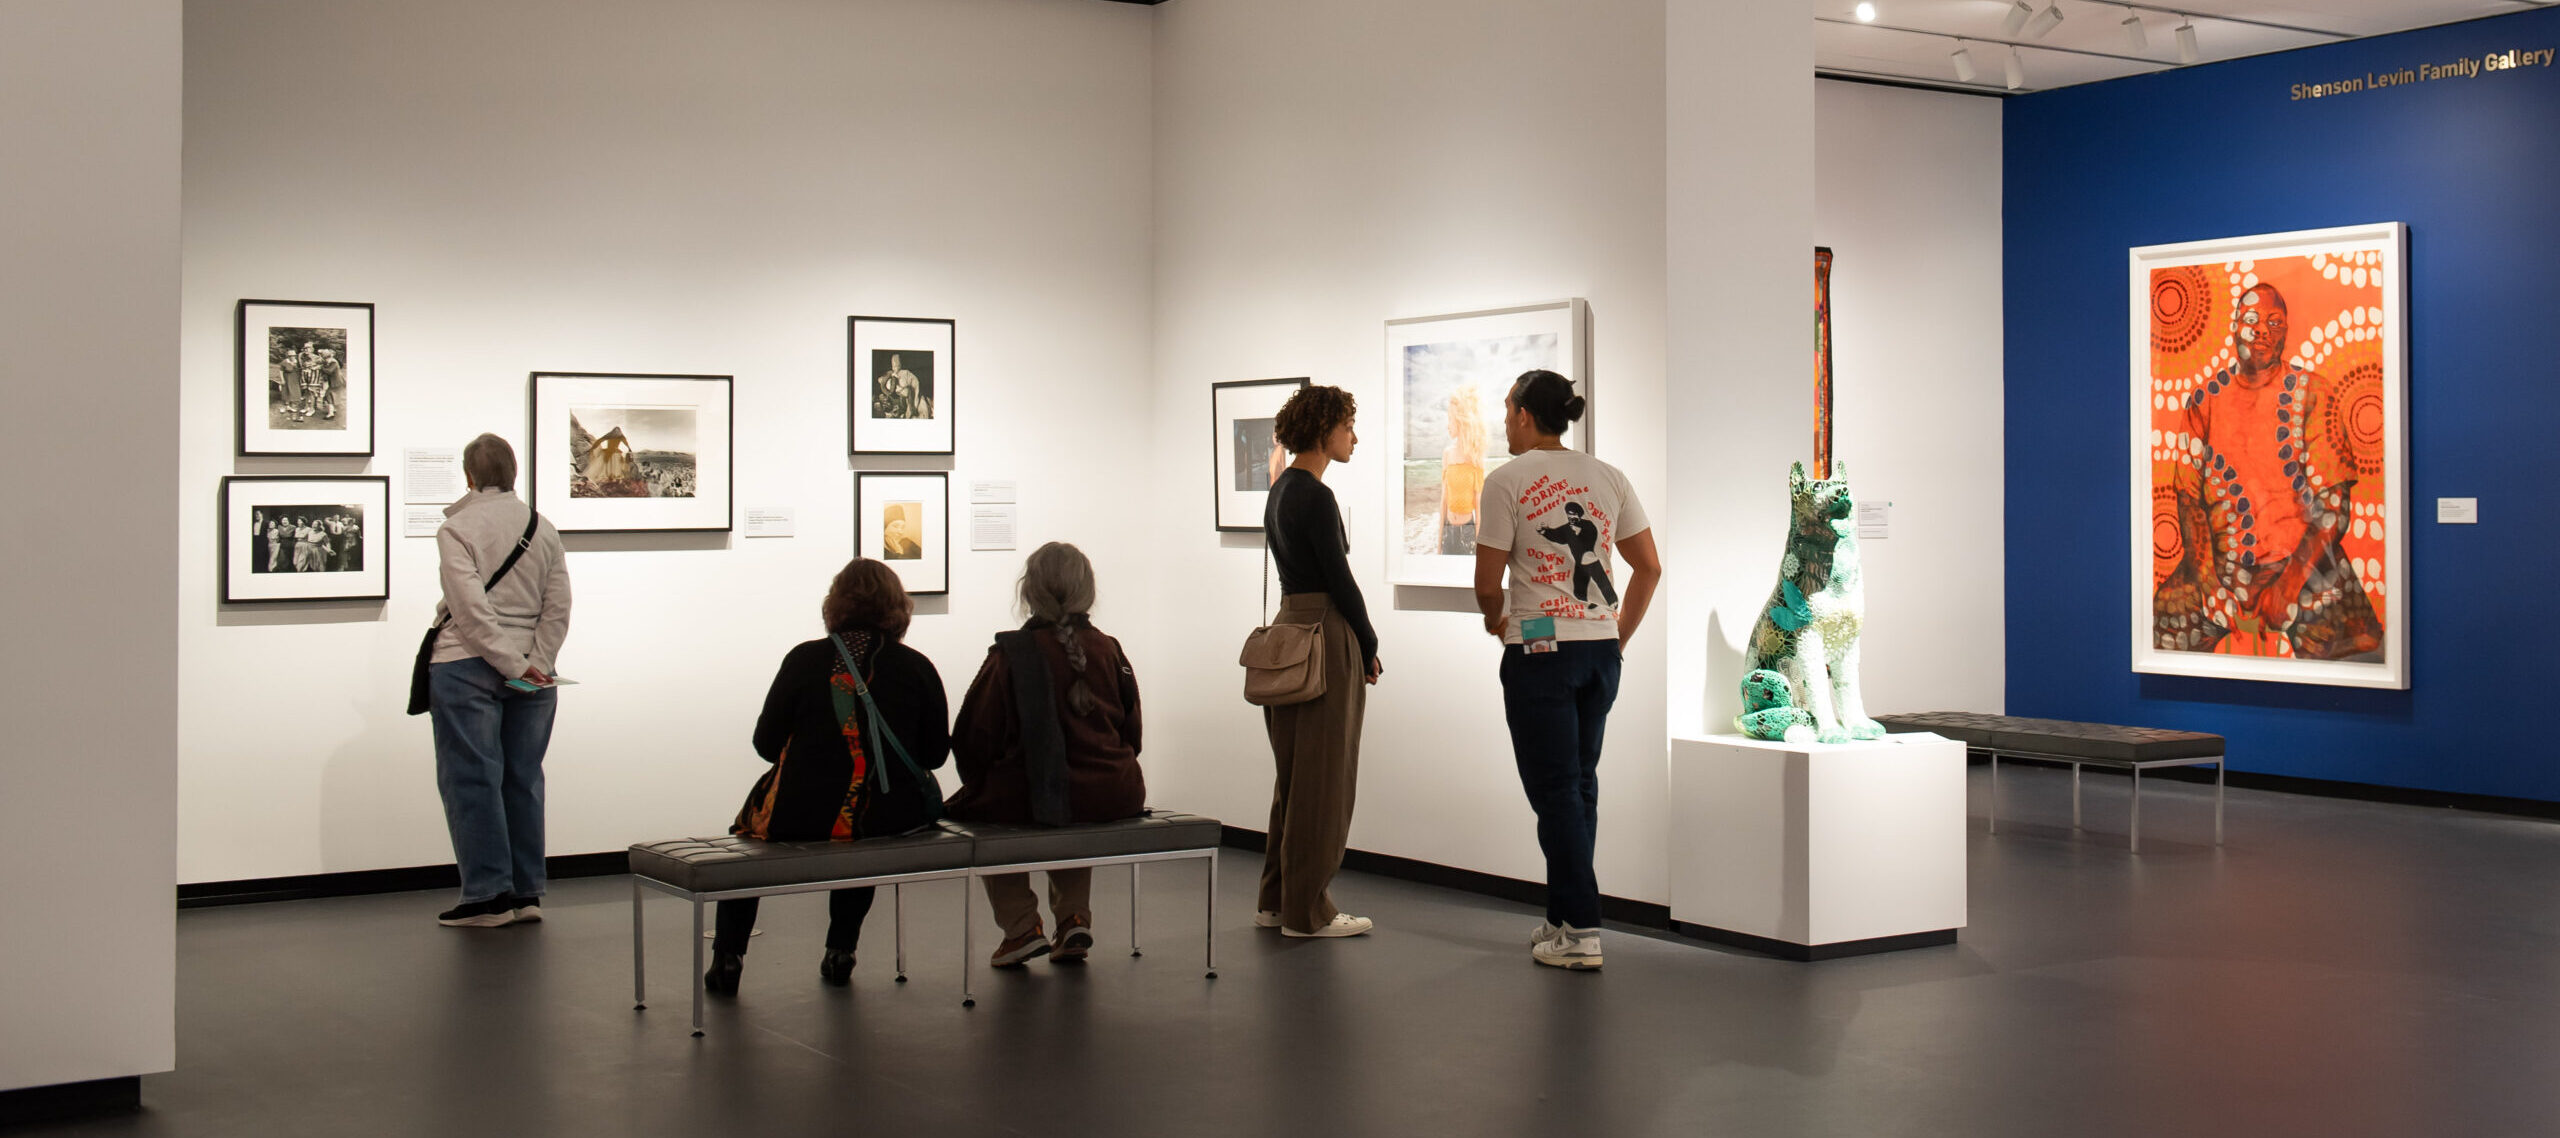 A modern museum gallery is photographed at a wide angle. Visitors observe large artworks on the walls and sculptures on pedestals.